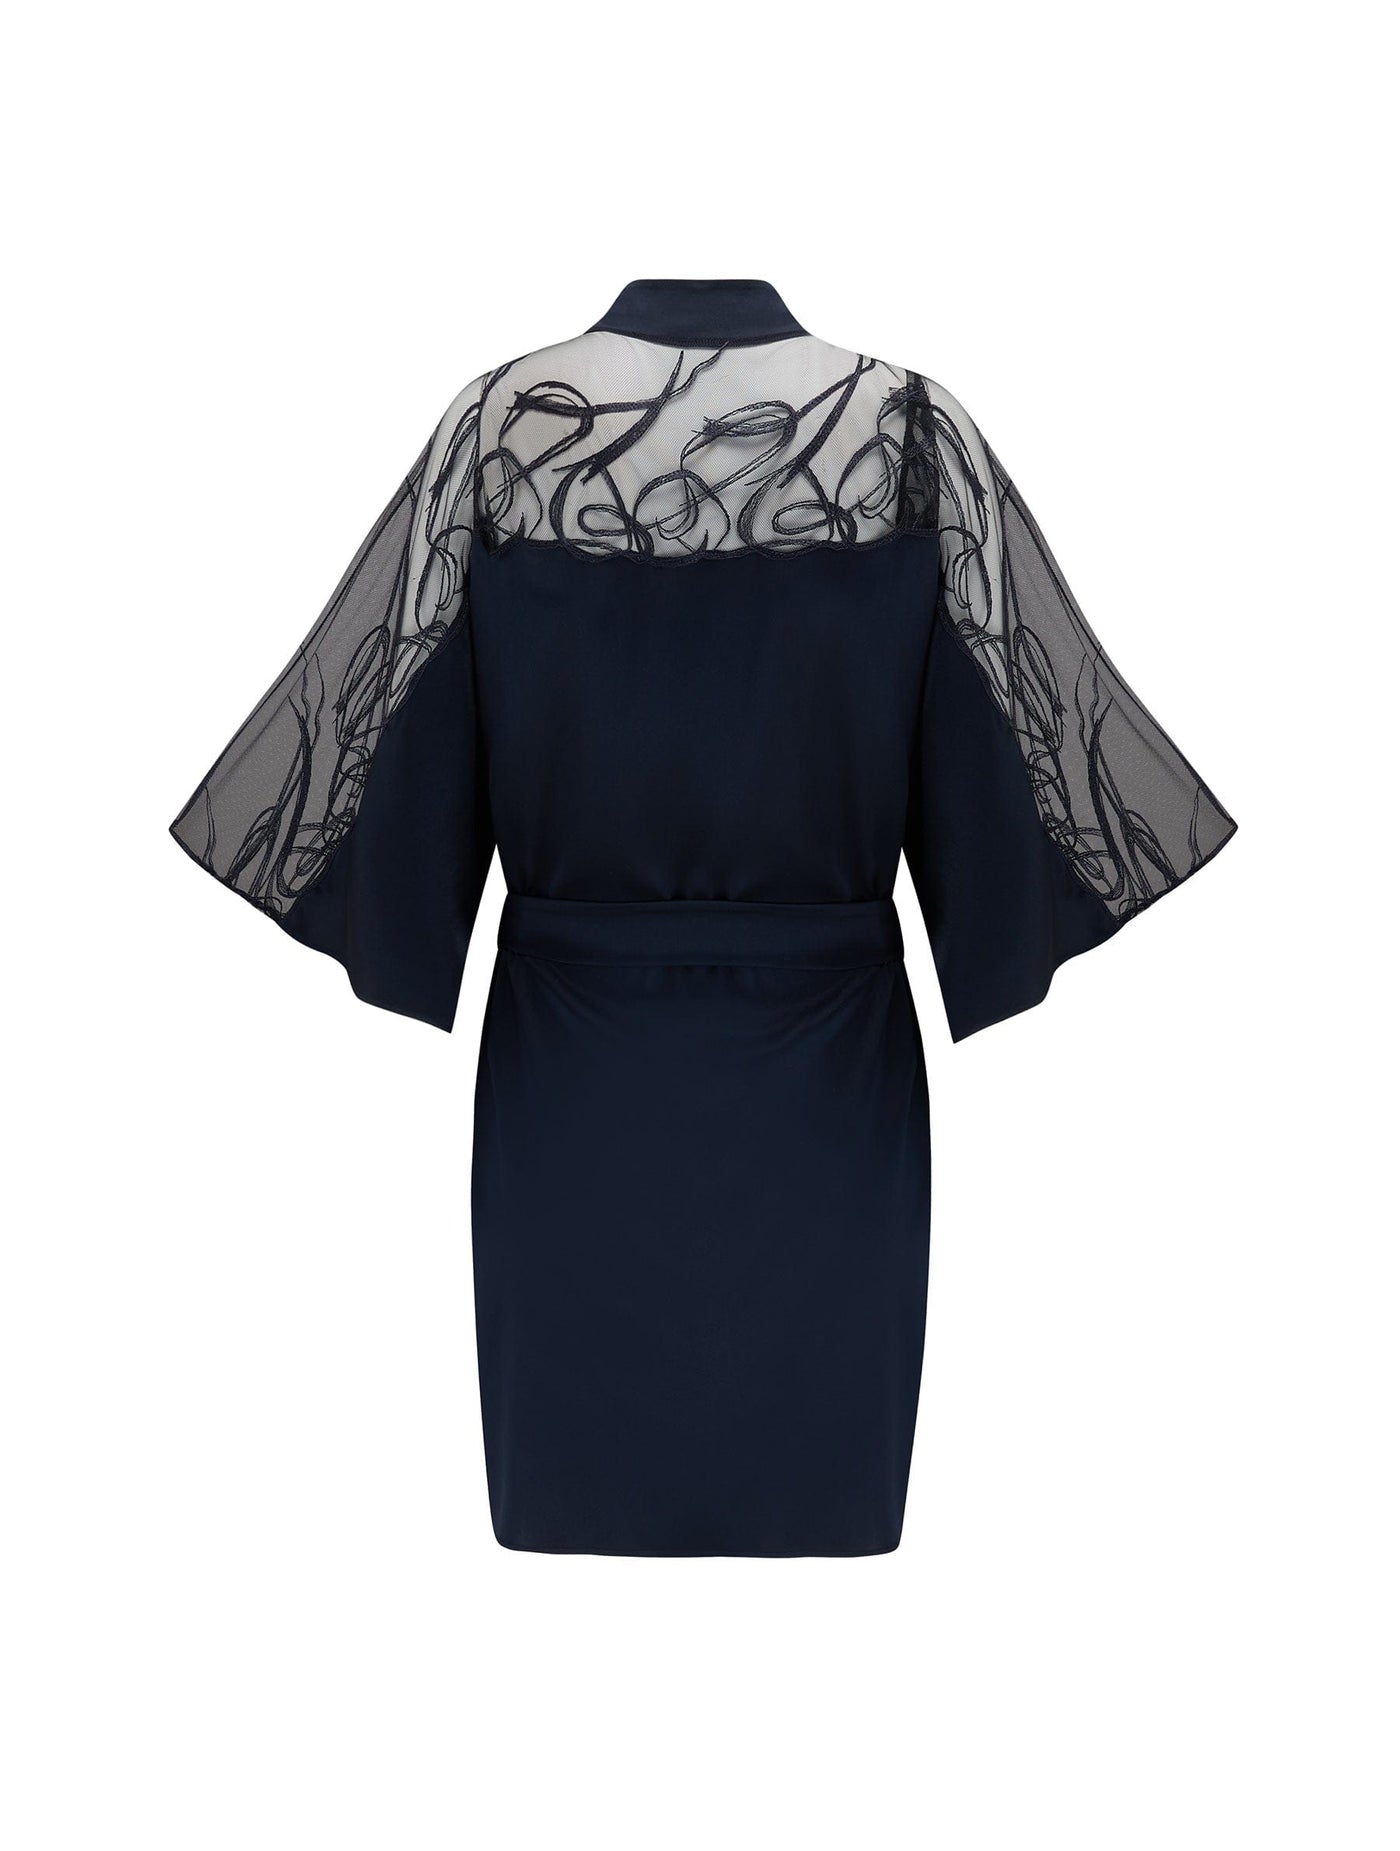 Navy blue Silk Robe with sheer embroidered panel across the back and sleeves.